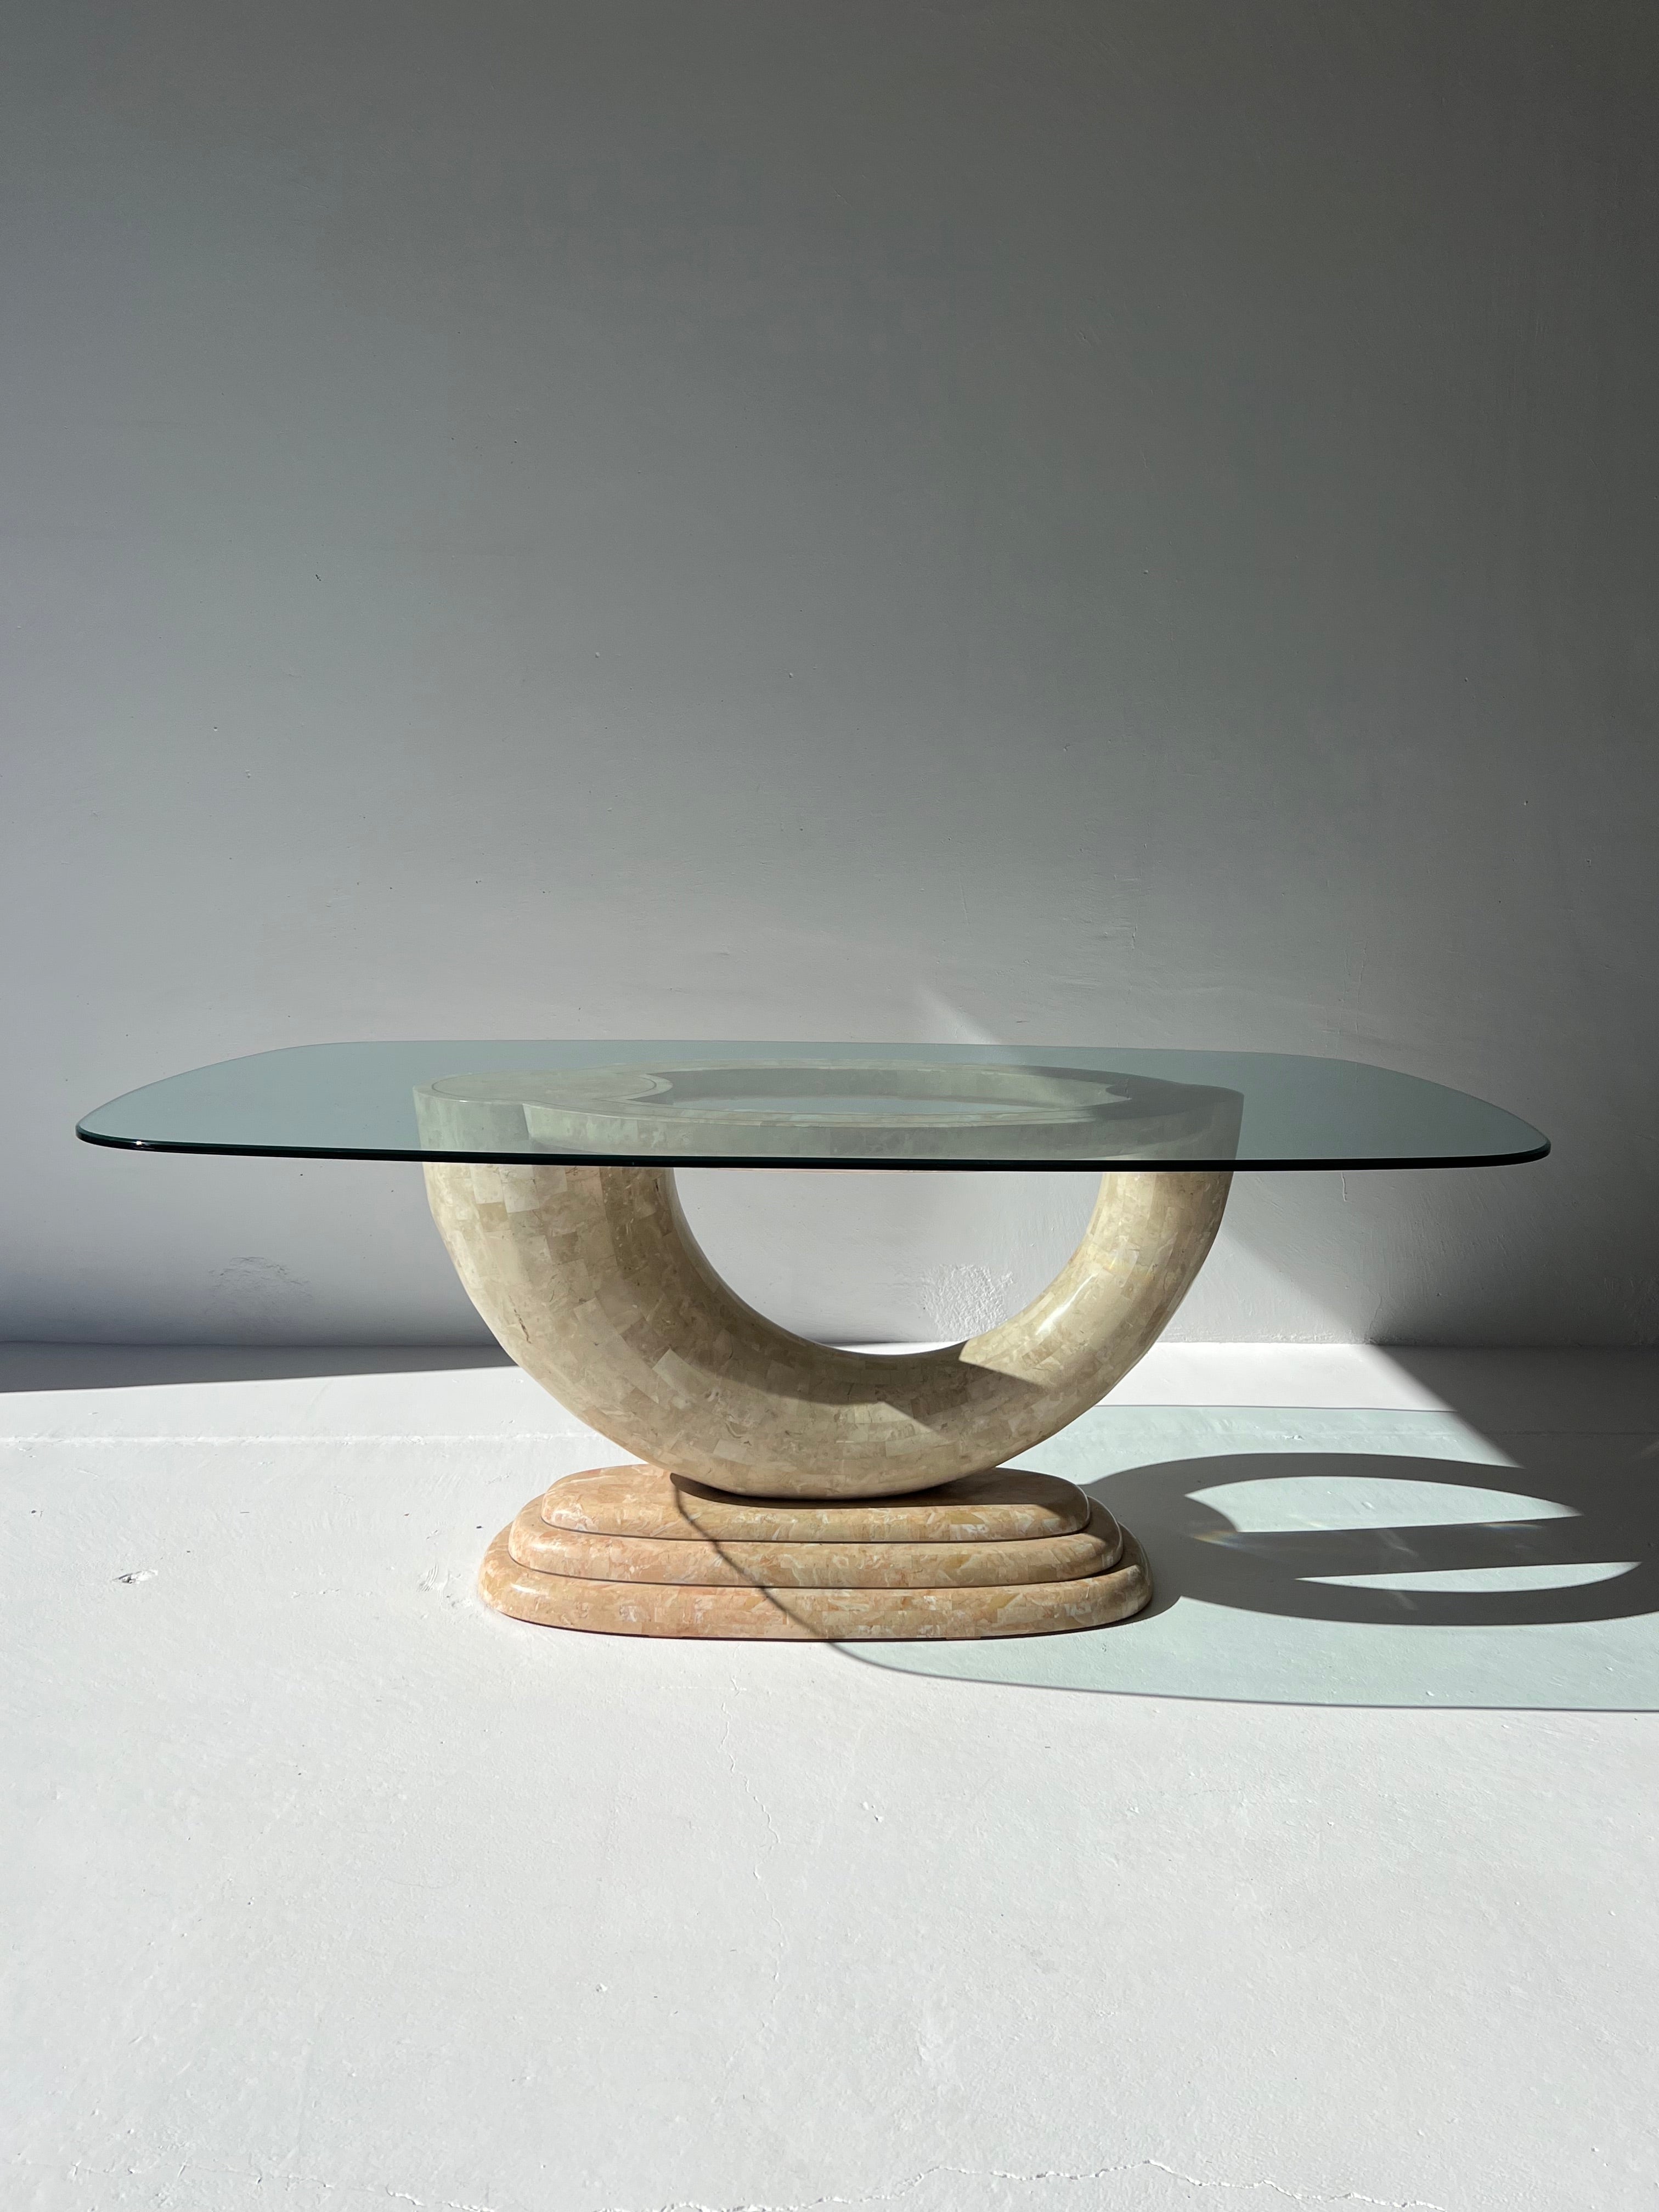 Tessellated Stone Dining Table with Glass Top